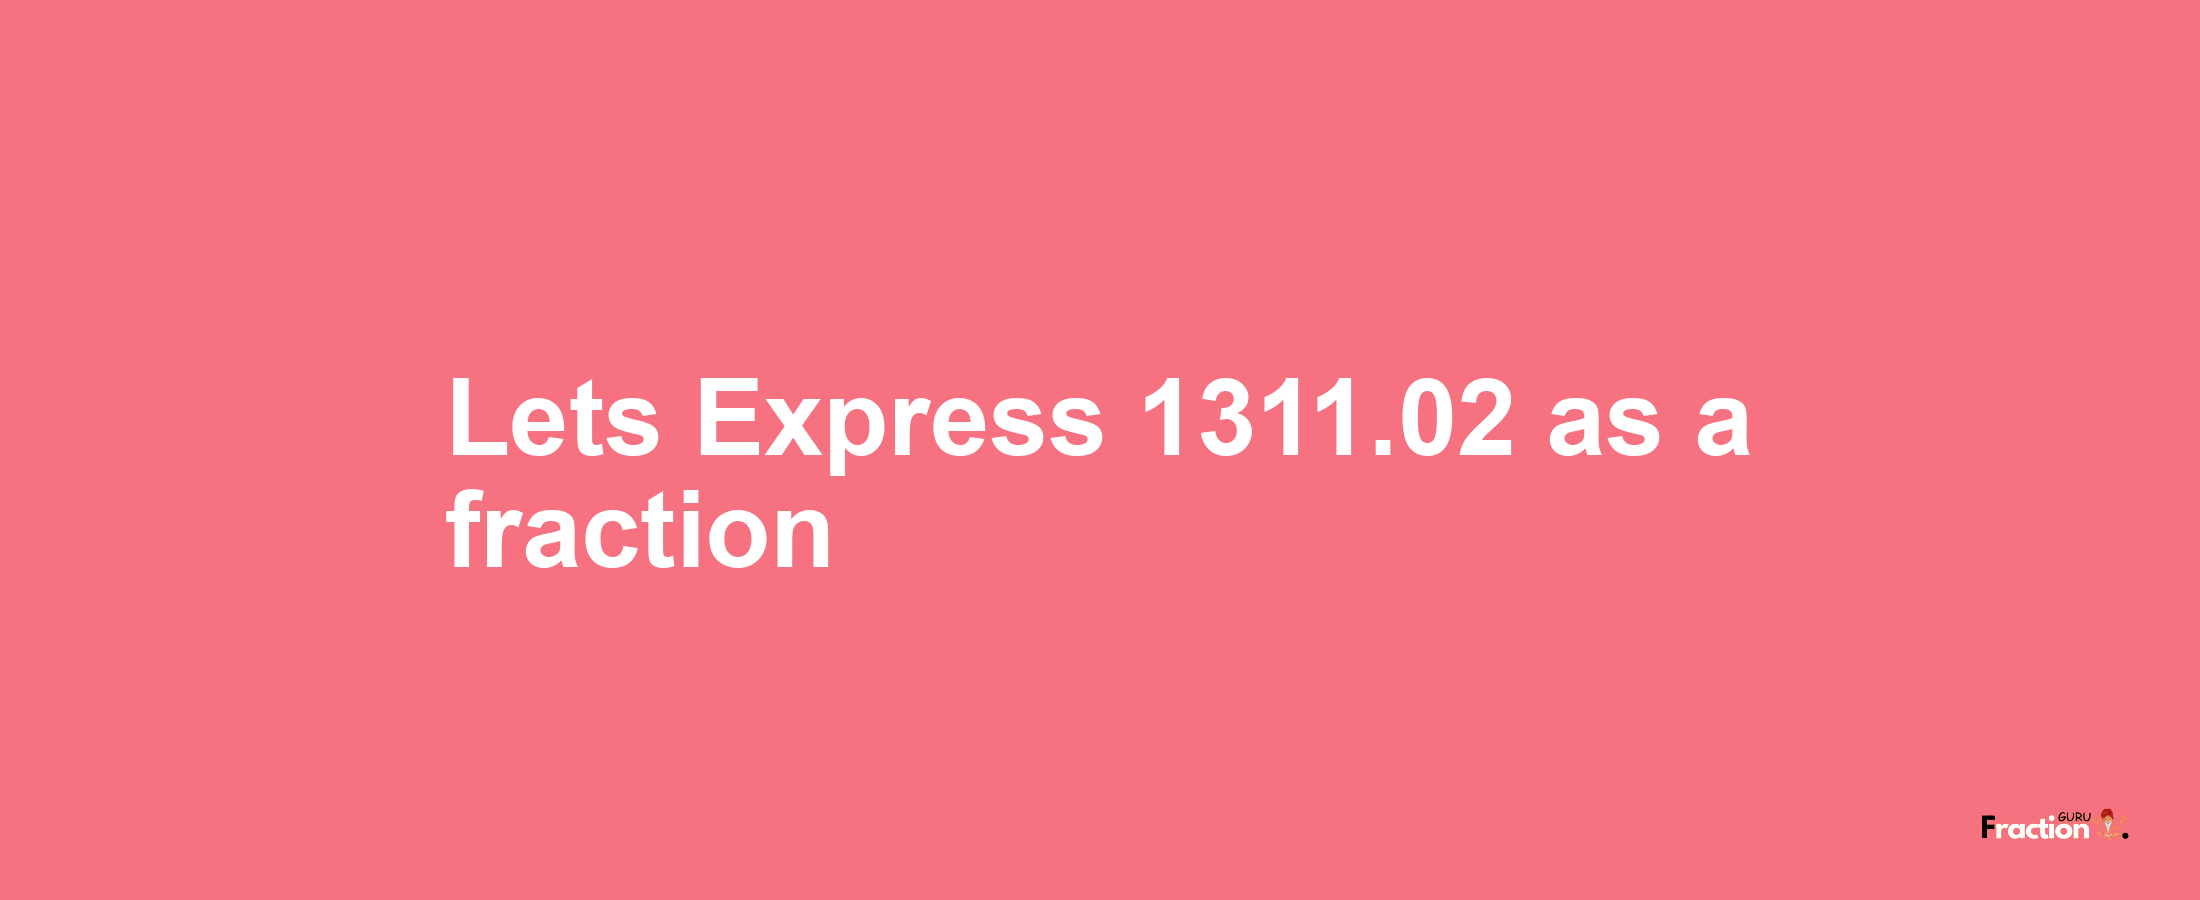 Lets Express 1311.02 as afraction